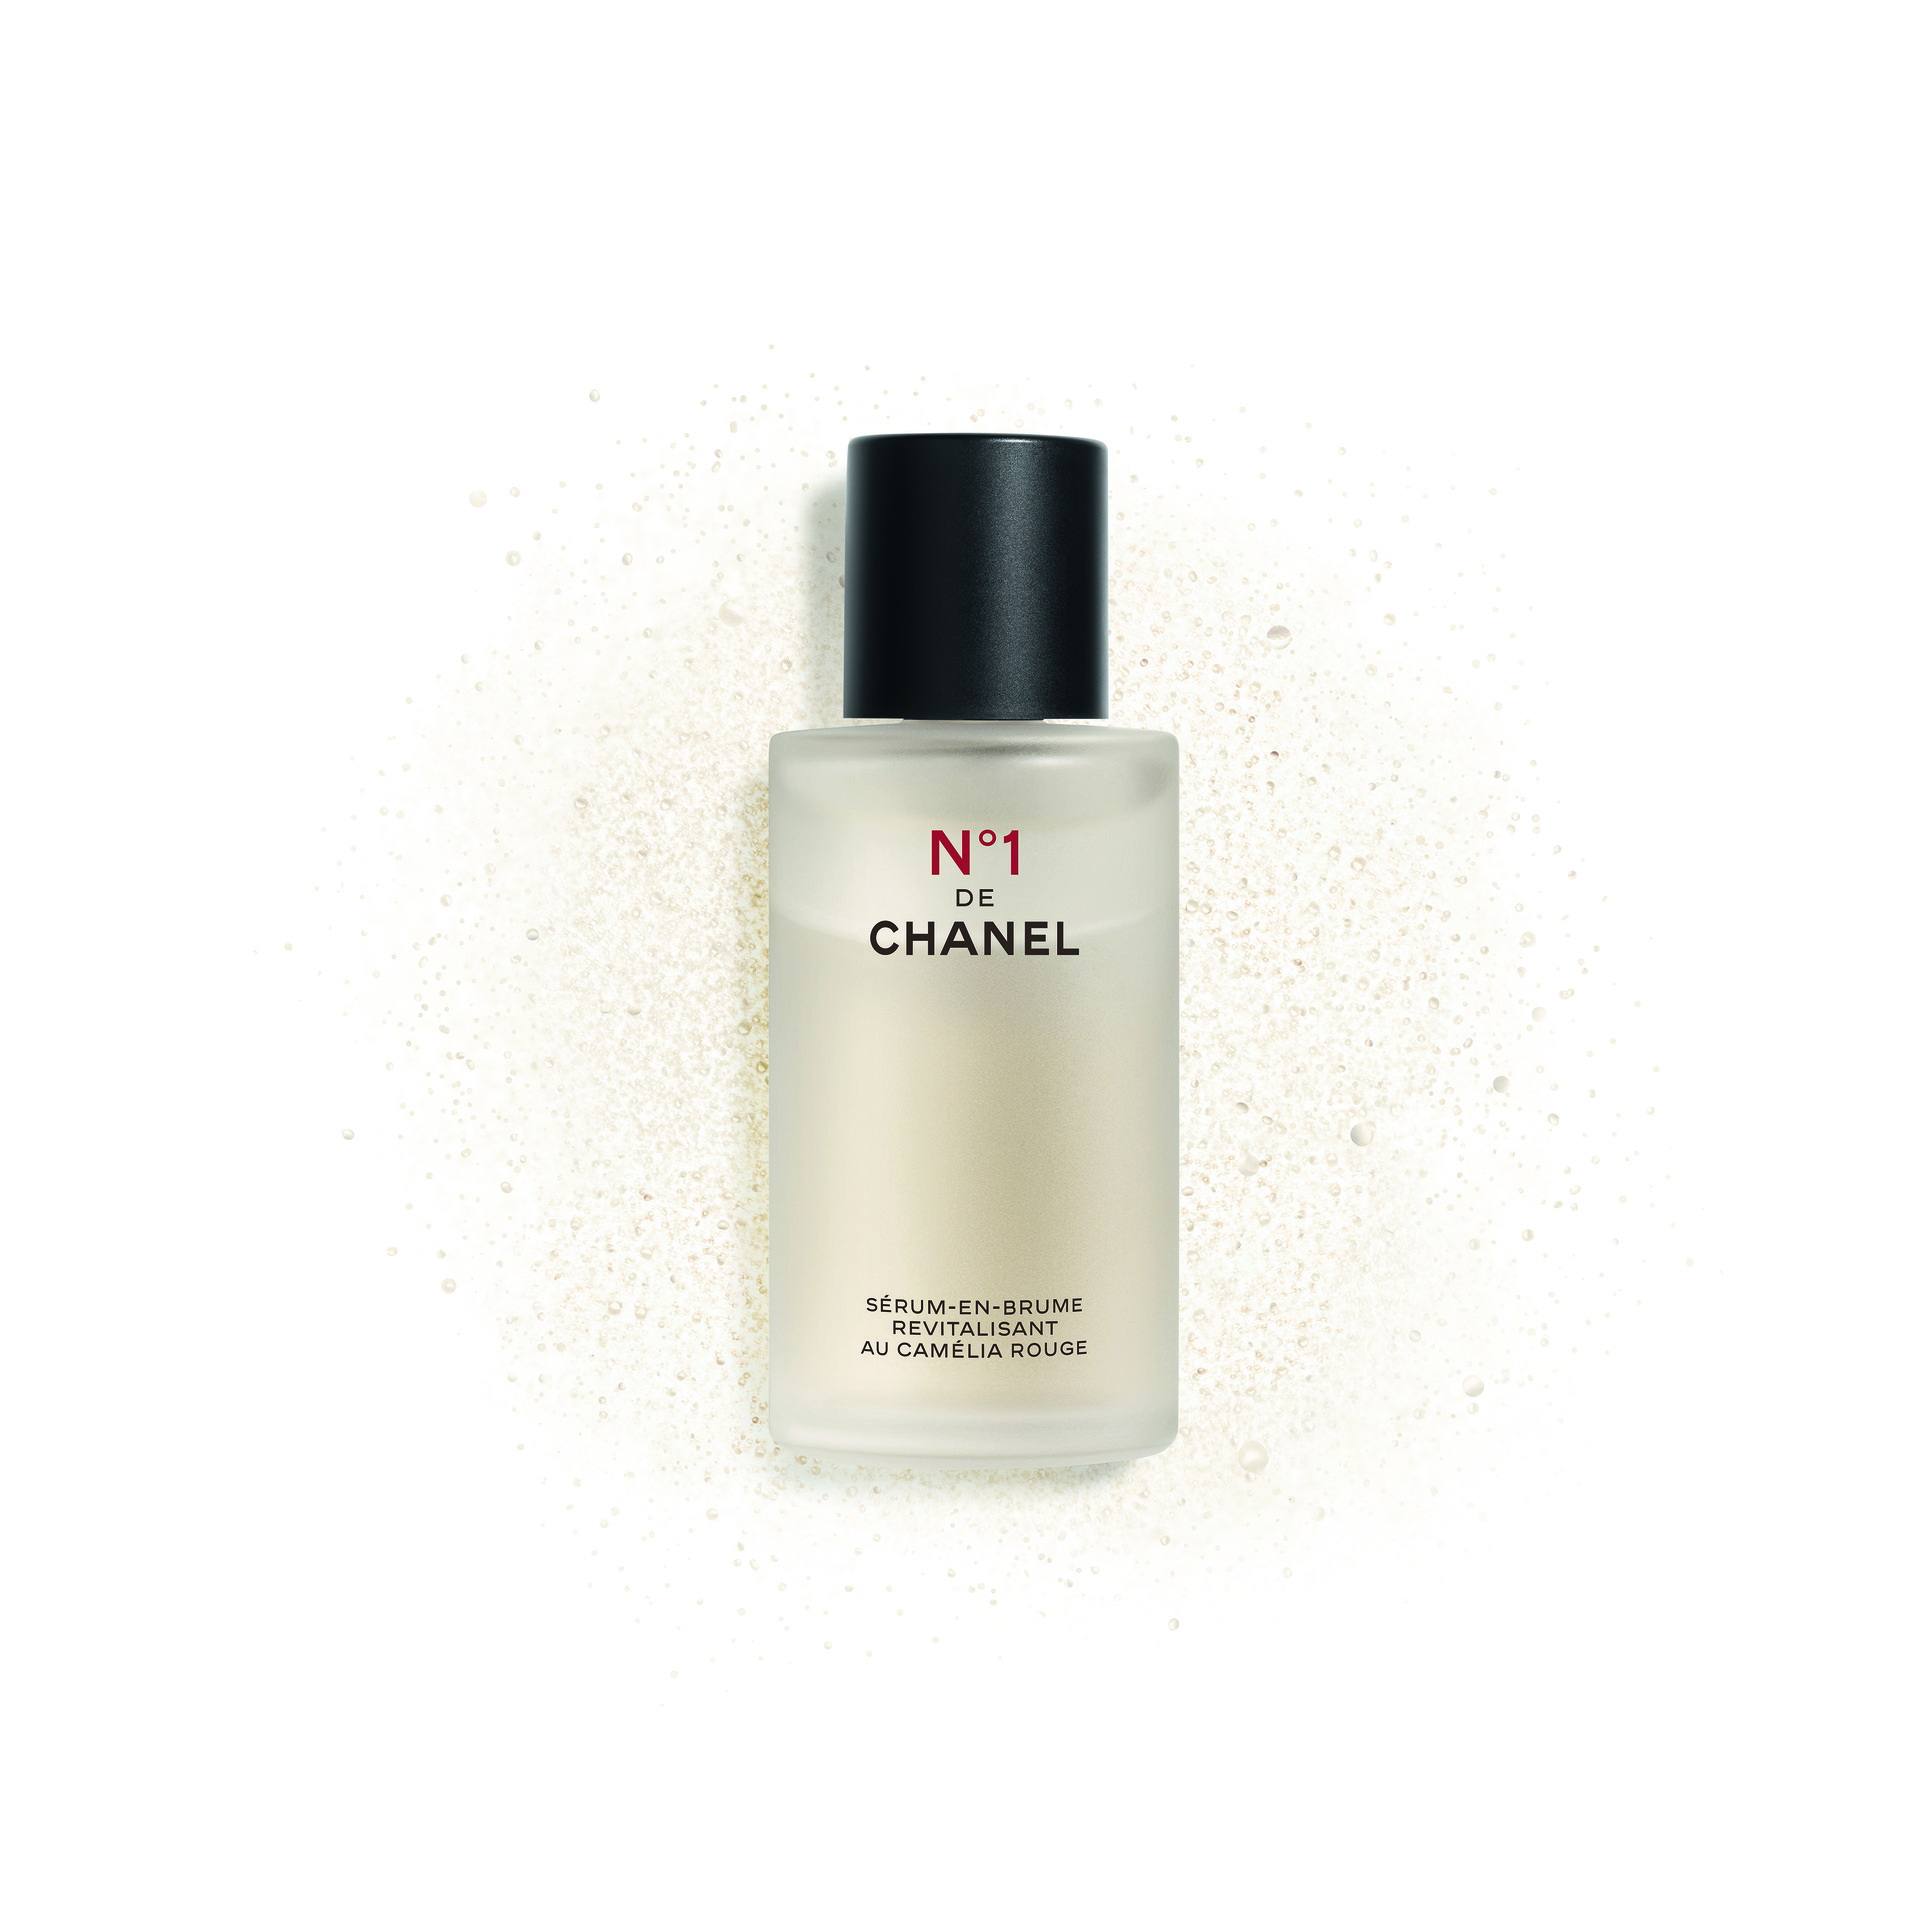 We Review The New, Sustainable N°1 de CHANEL Beauty Line